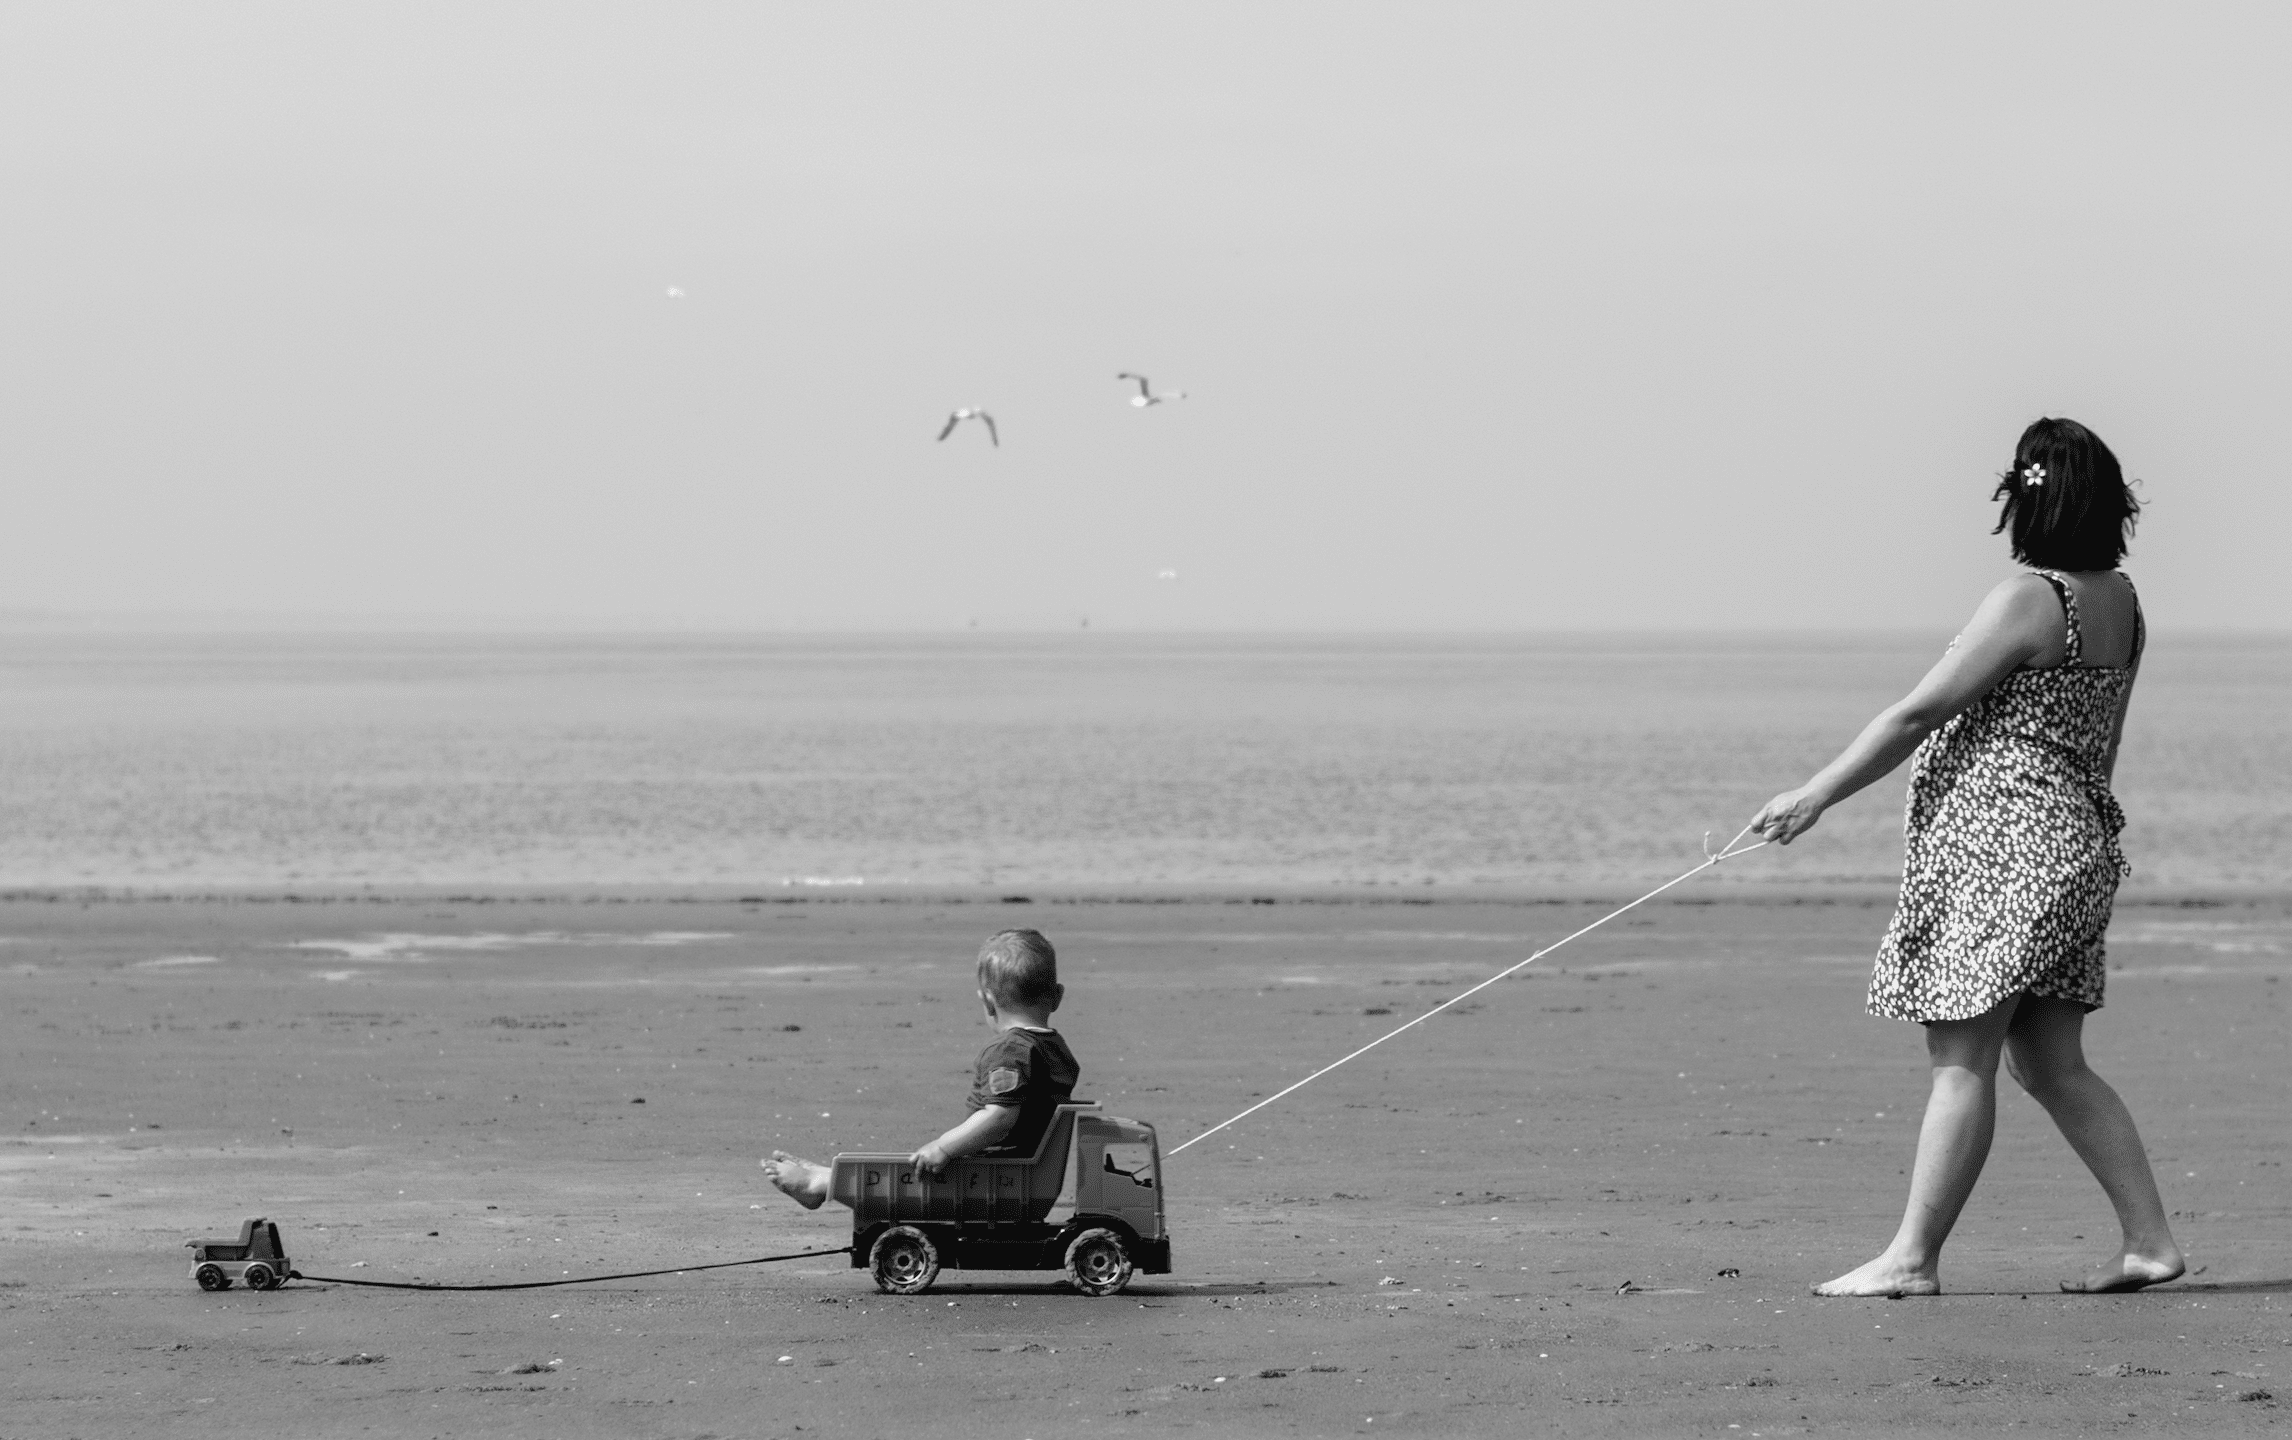 Black and white photo, vintage mum pulling child along on cart on a beach with sea in background